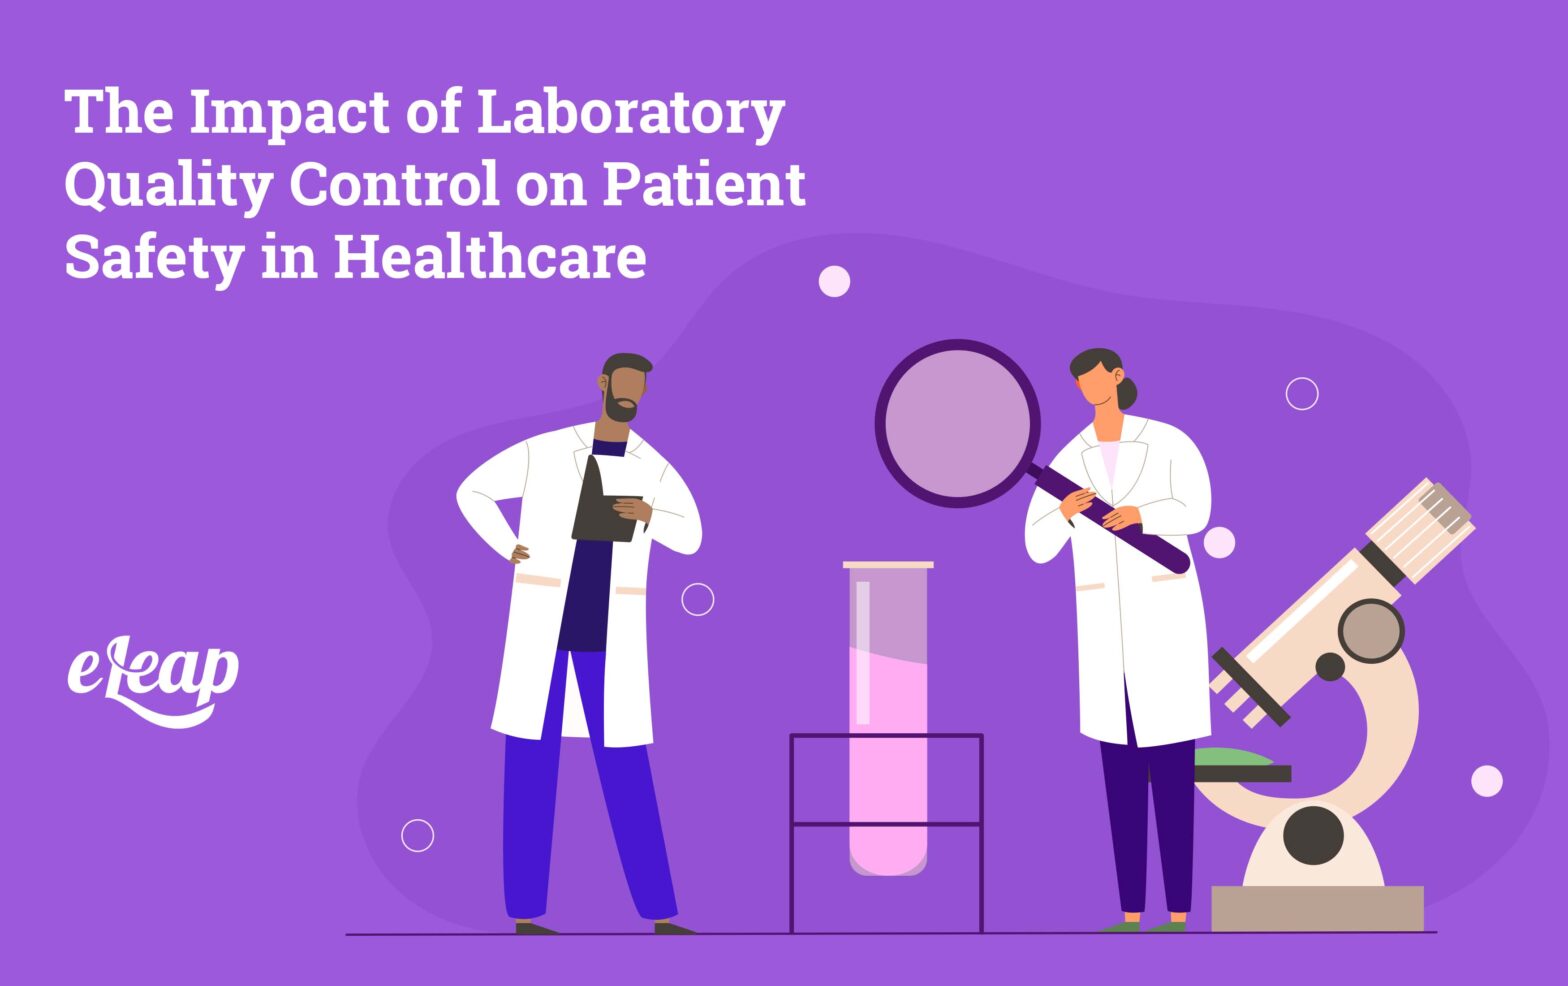 The Impact of Laboratory Quality Control on Patient Safety in Healthcare